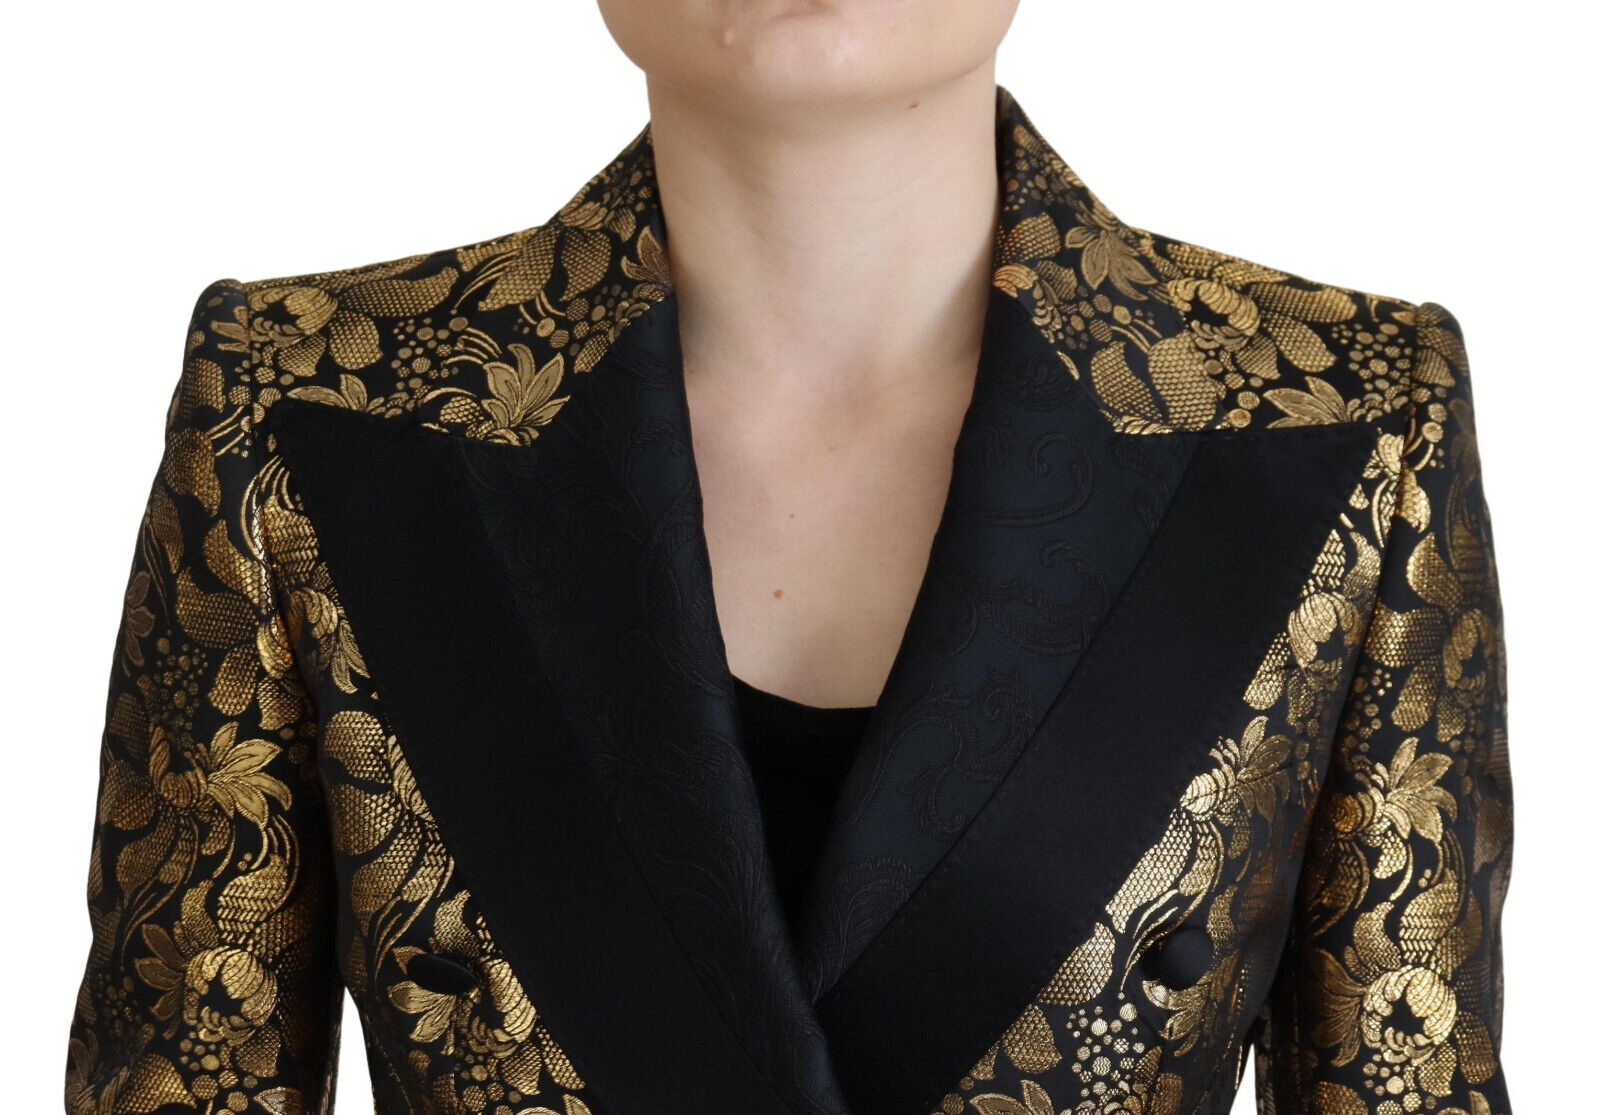 Dolce & Gabbana Black Gold Jacquard Coat Blazer Jacket - Designed by Dolce & Gabbana Available to Buy at a Discounted Price on Moon Behind The Hill Online Designer Discount Store